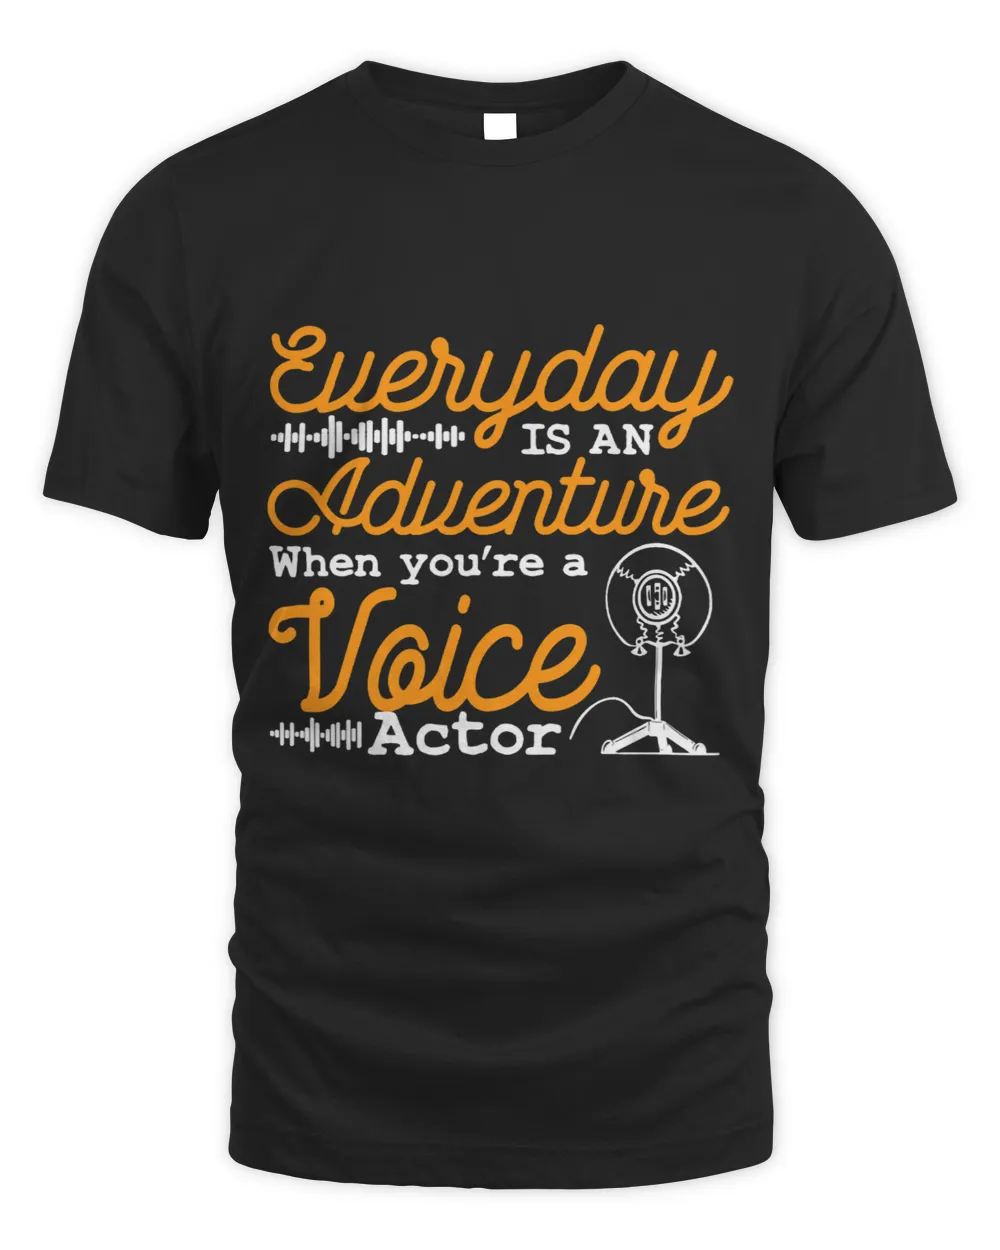 Voice Actor Voiceover Actress Acting Talent Voiceover 4